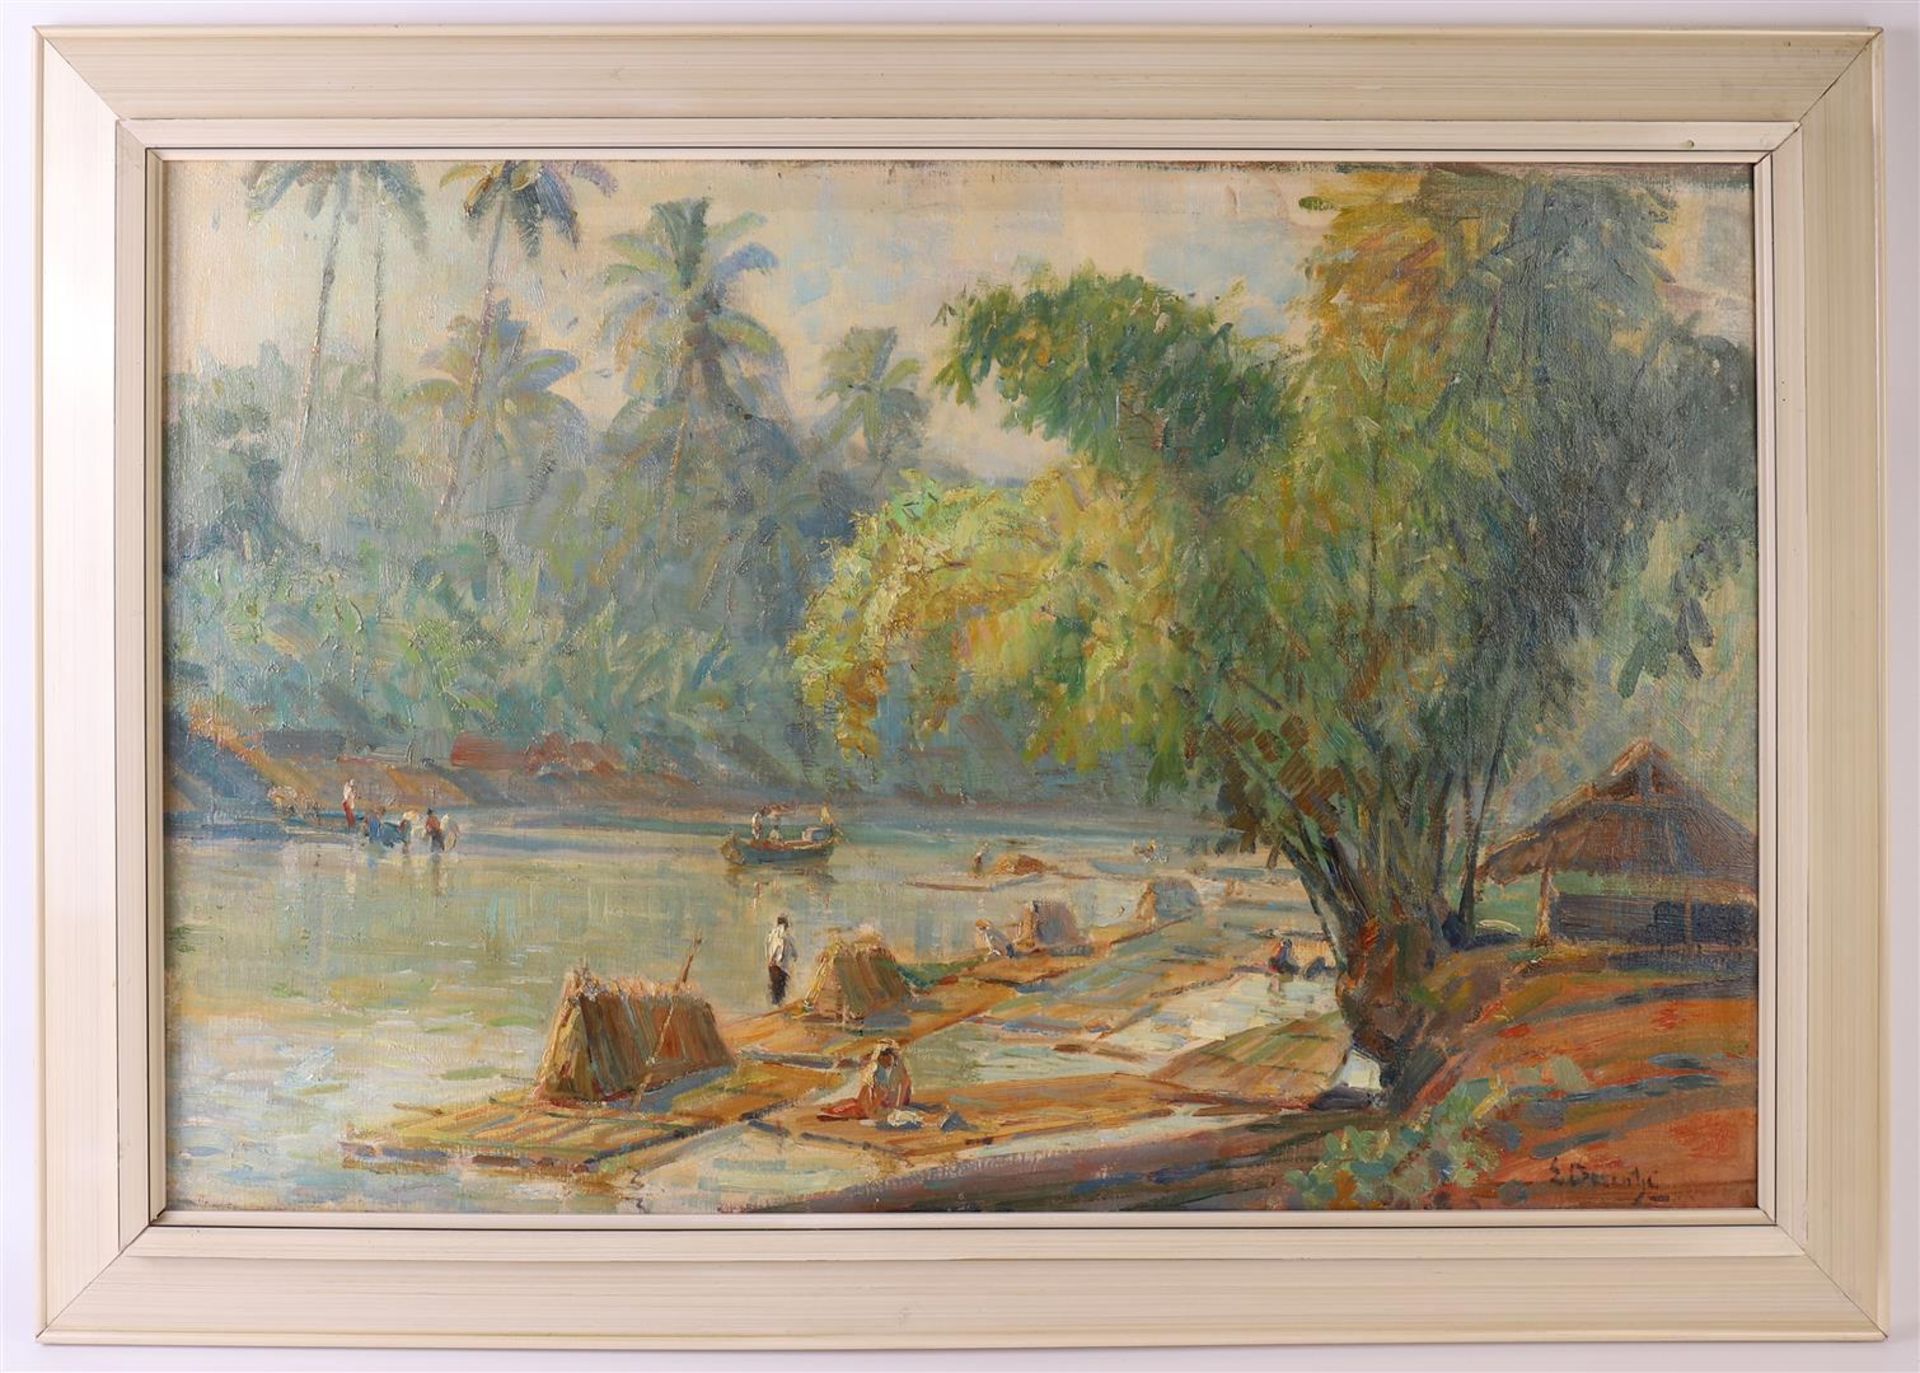 Dezentjé, Ernest (1884-1971) "In the morning at the river", signed in full lower right, verso